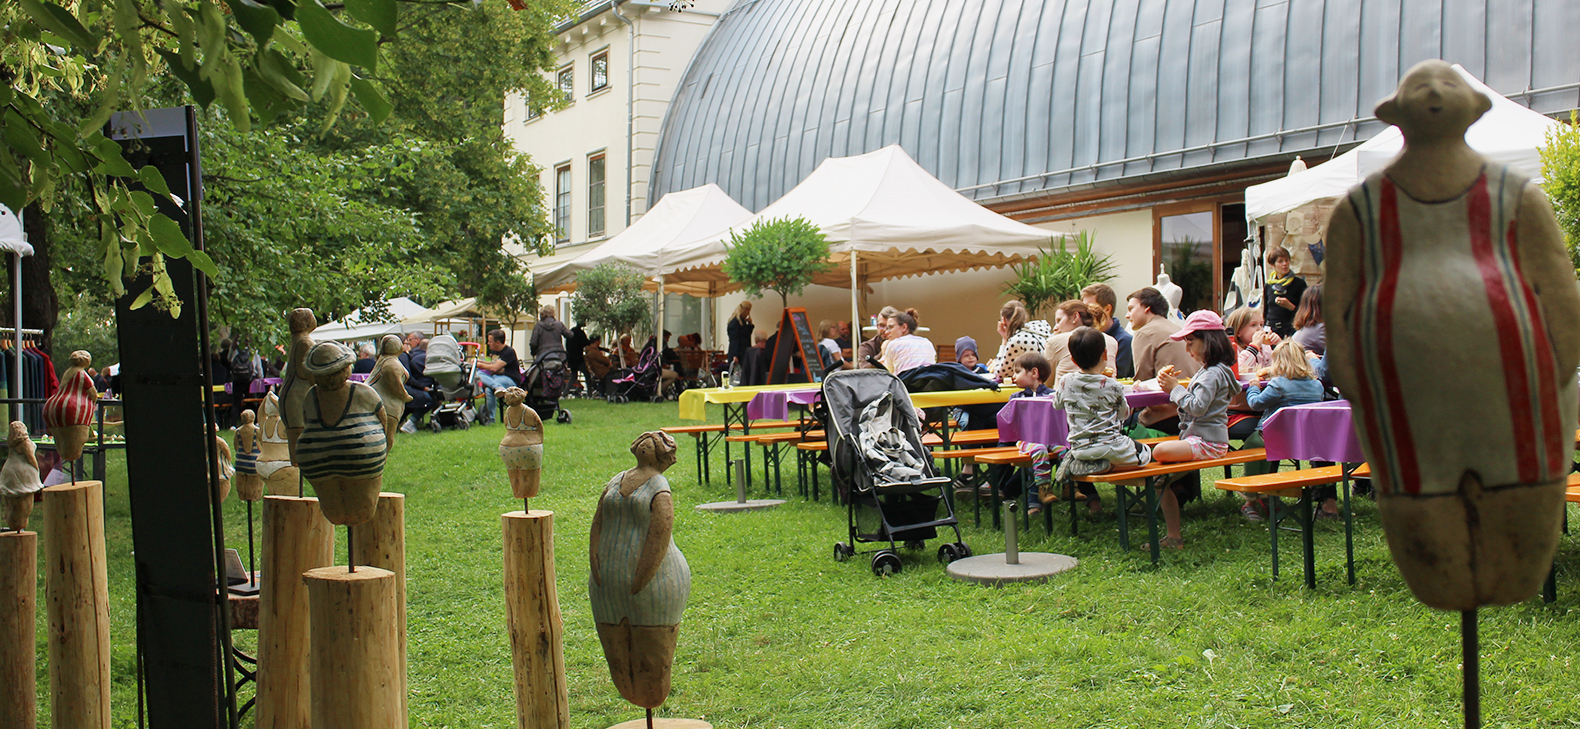 View of the Garden at the Schafhof - European center for art of the district of Upper Bavaria during the Johannismarket of 2018.